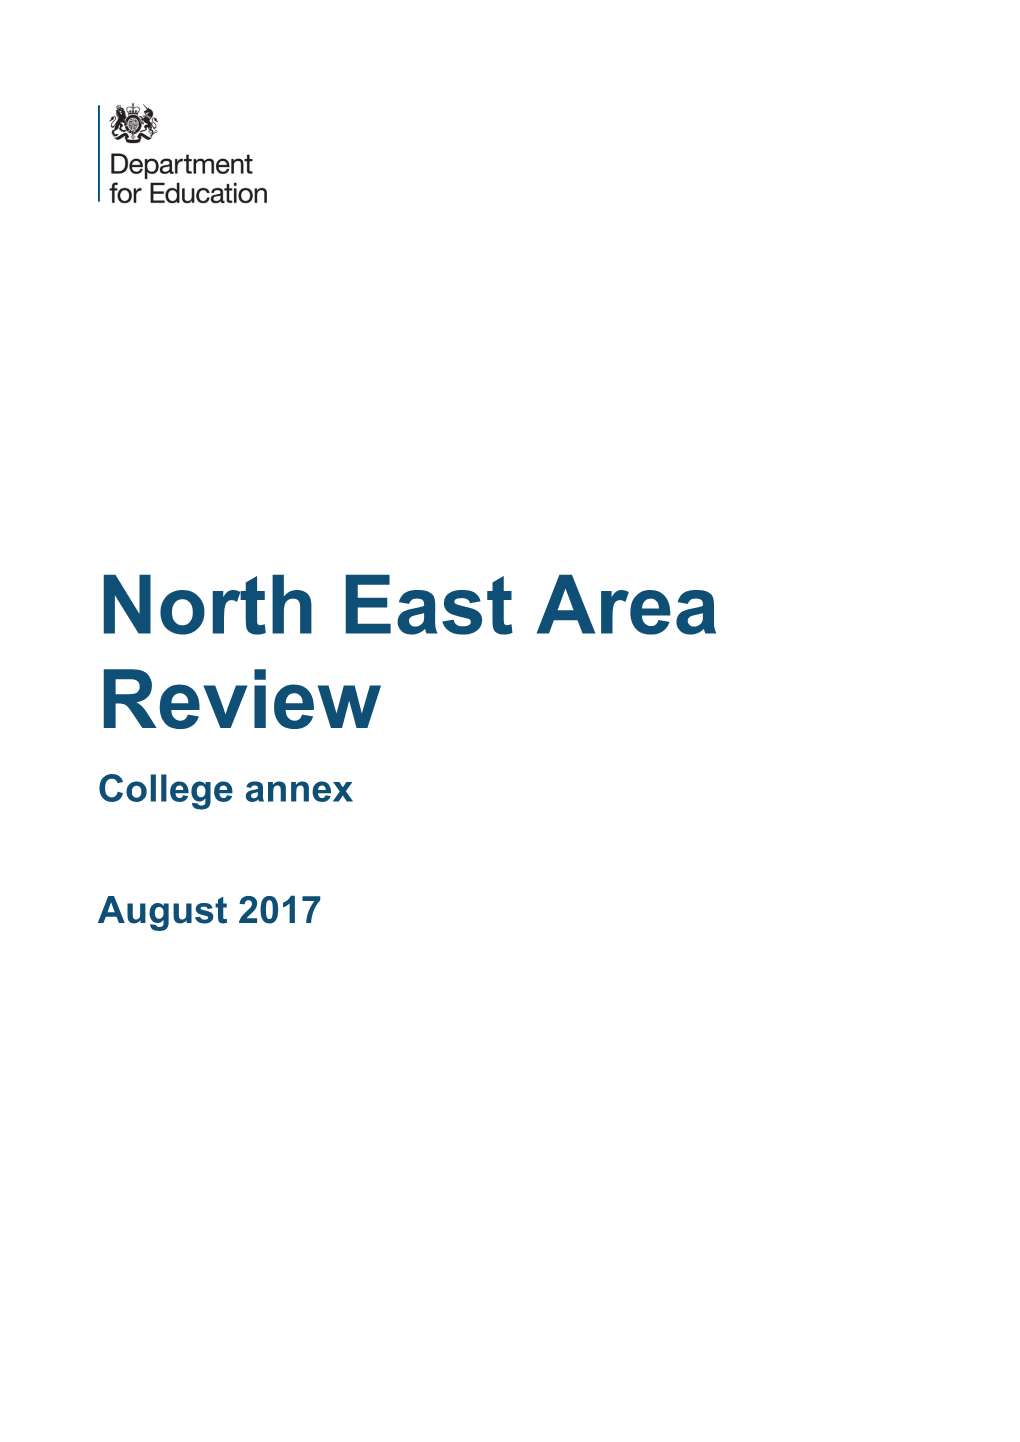 North East Area Review: College Annex